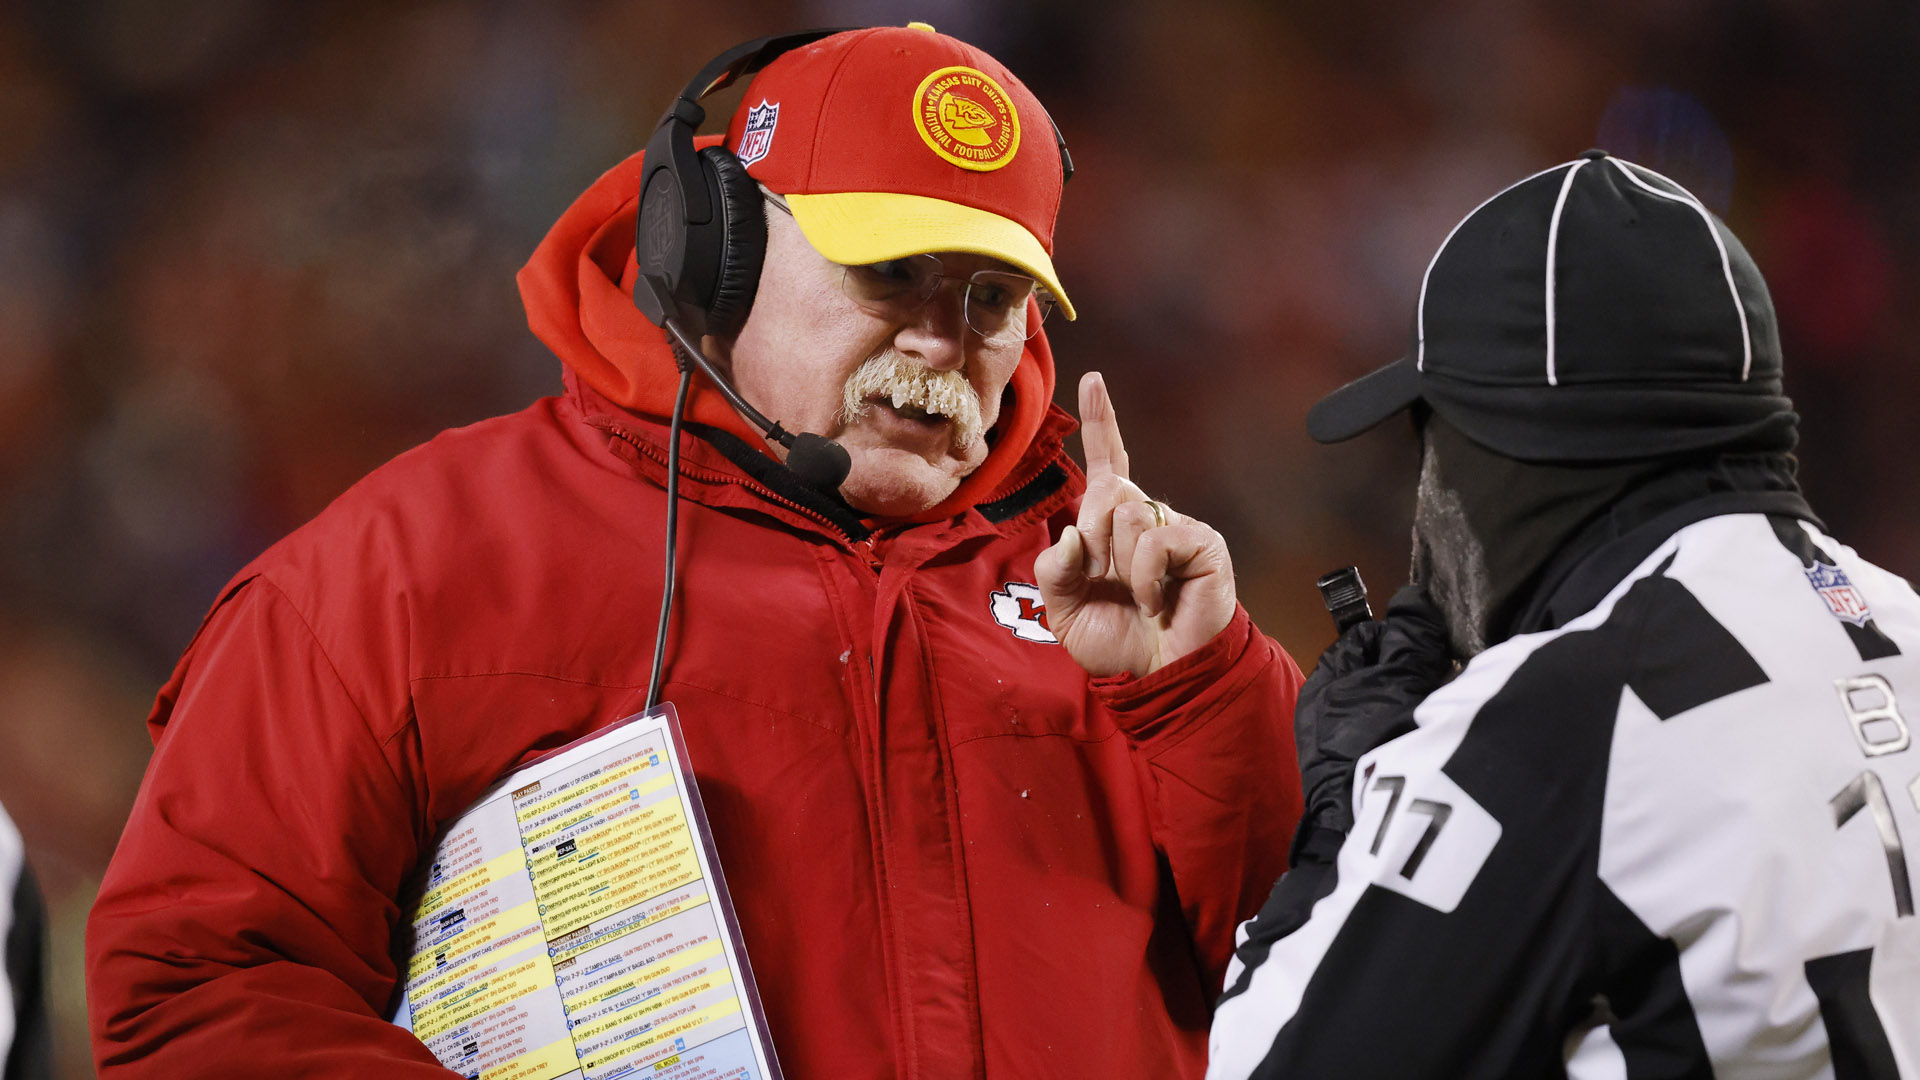 kansas city chiefs set to open talks on record-breaking contract extension following latest super bowl victory